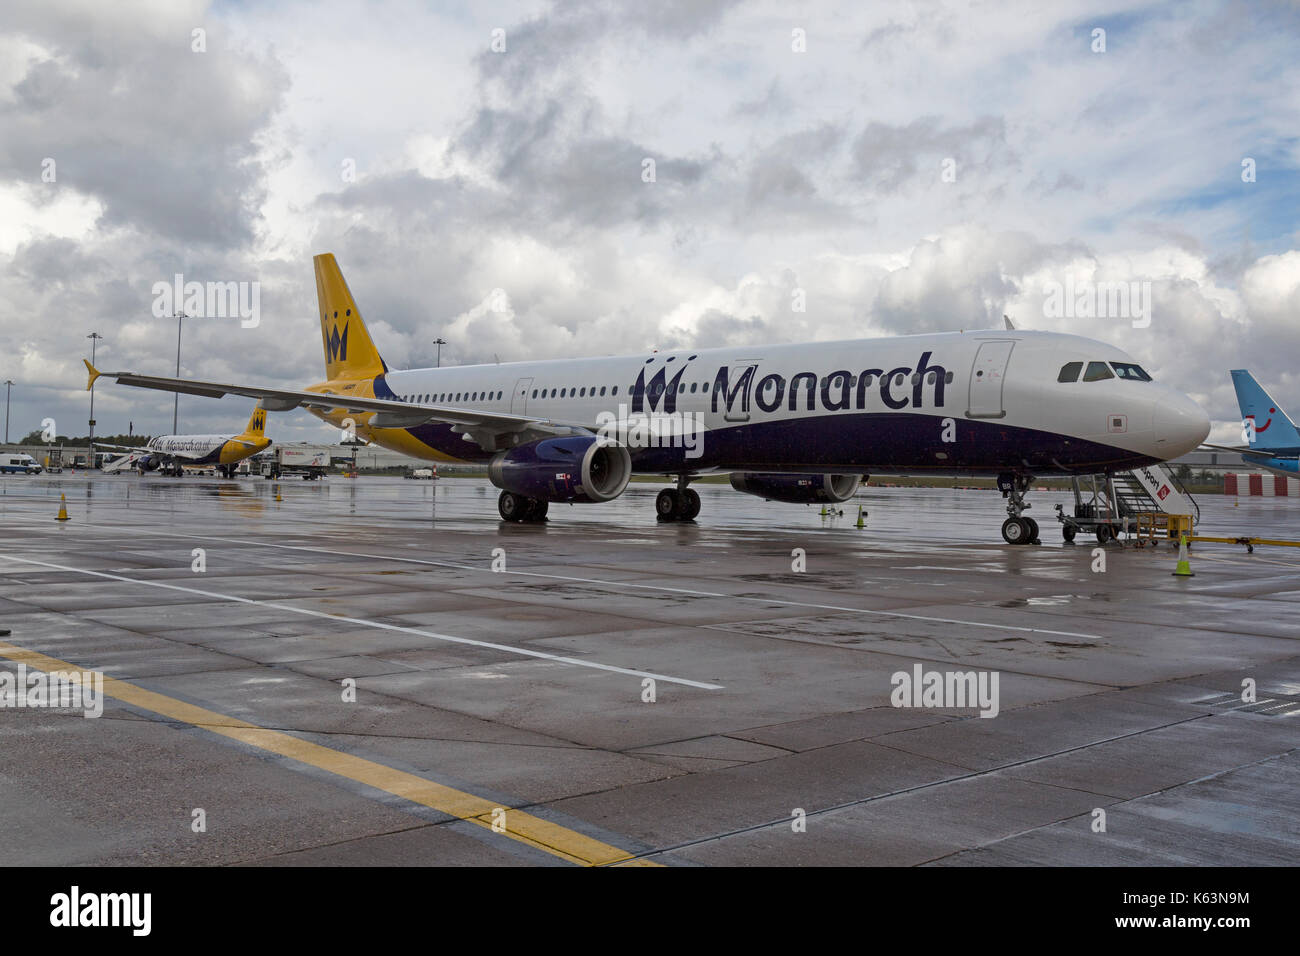 Monarch Airlines Airbus A321, G-OZBR, at Birmingham Airport in England. Stock Photo